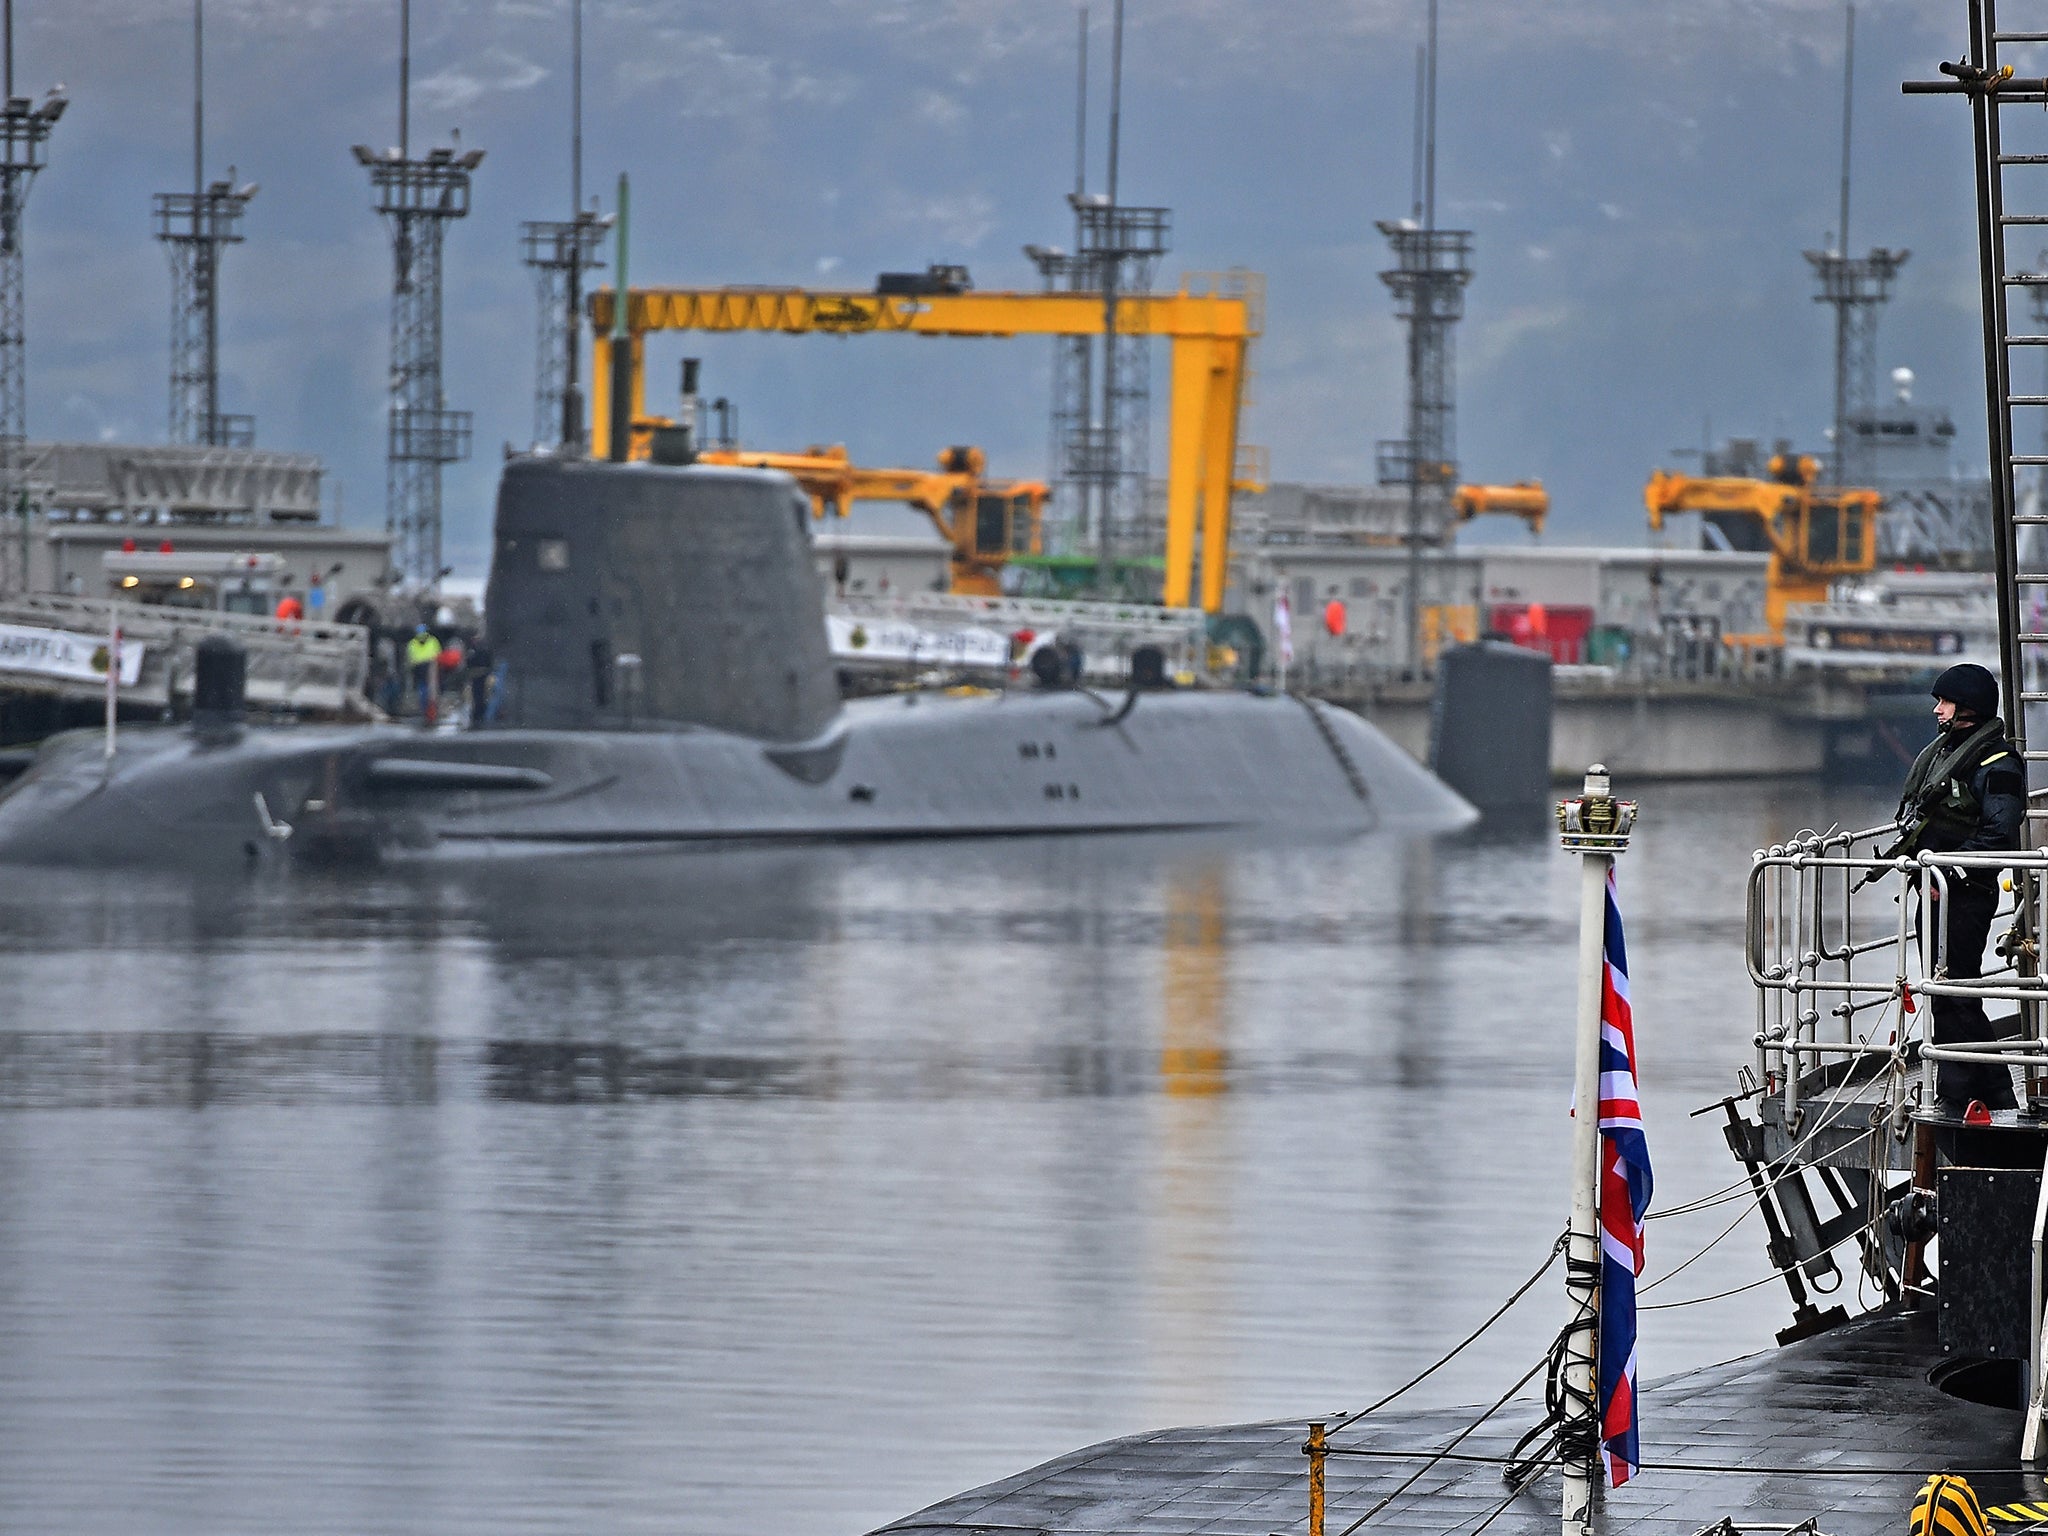 HMS Vigilant, one of four submarines carrying the Trident missile system